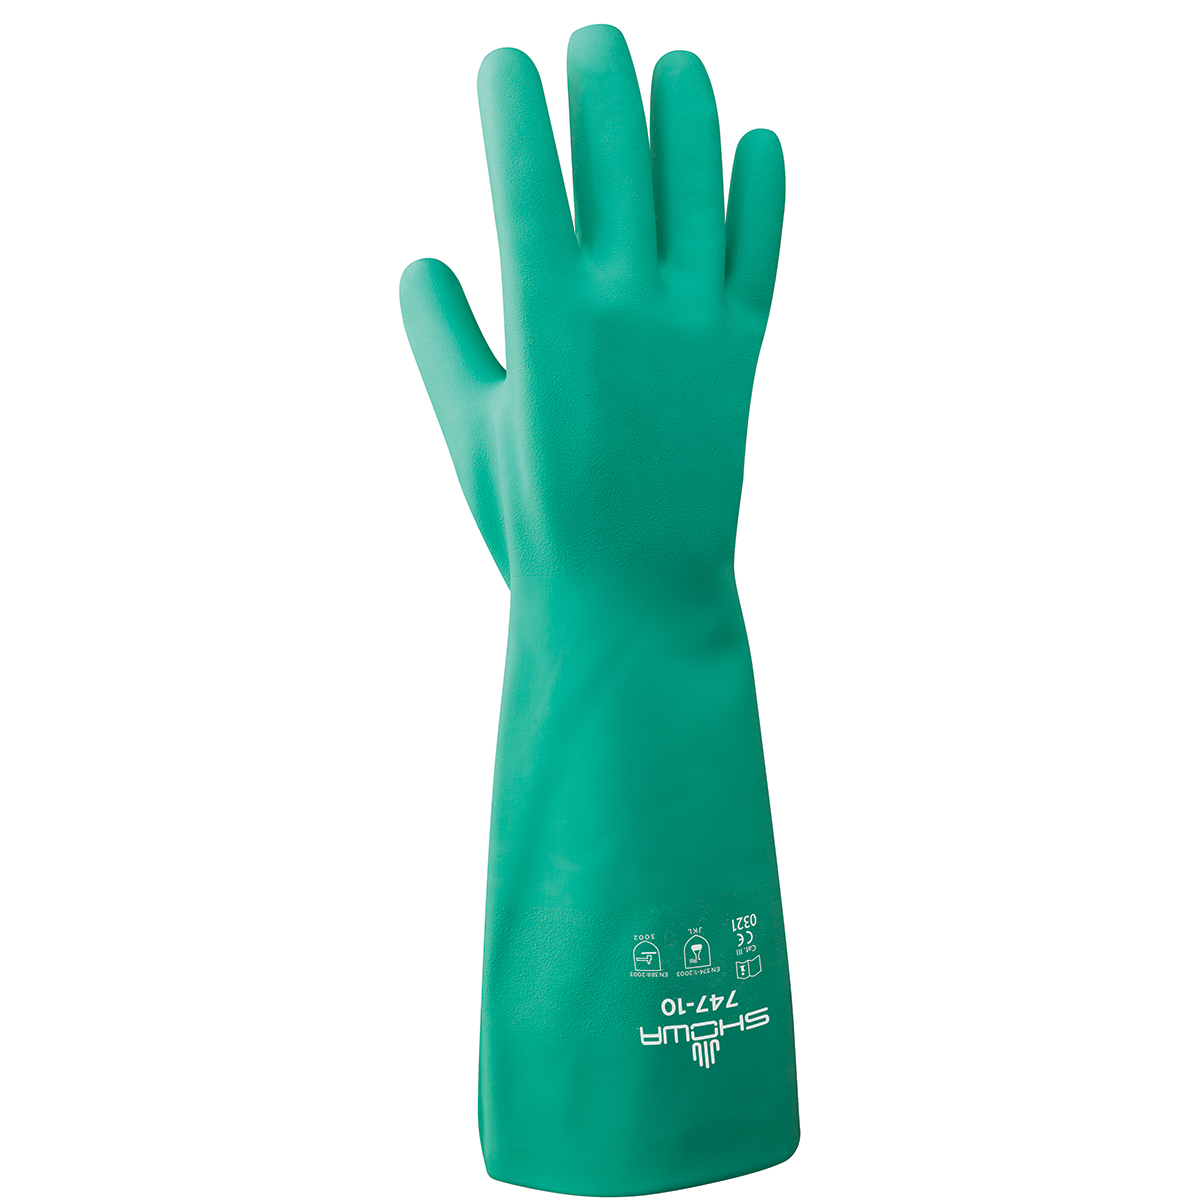 Chemical resistant unsupported nitrile, 19", 22-mil, light green, bisque finish, unlined, medium